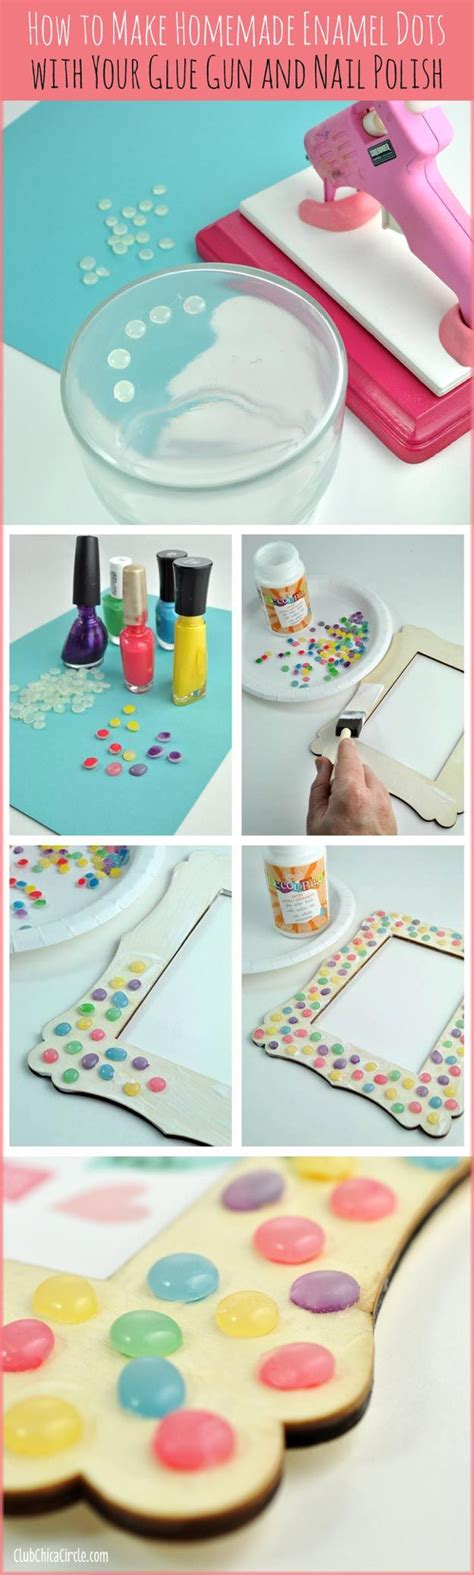 38 Unbelievably Cool Things You Can Make With A Glue Gun Idéias Para